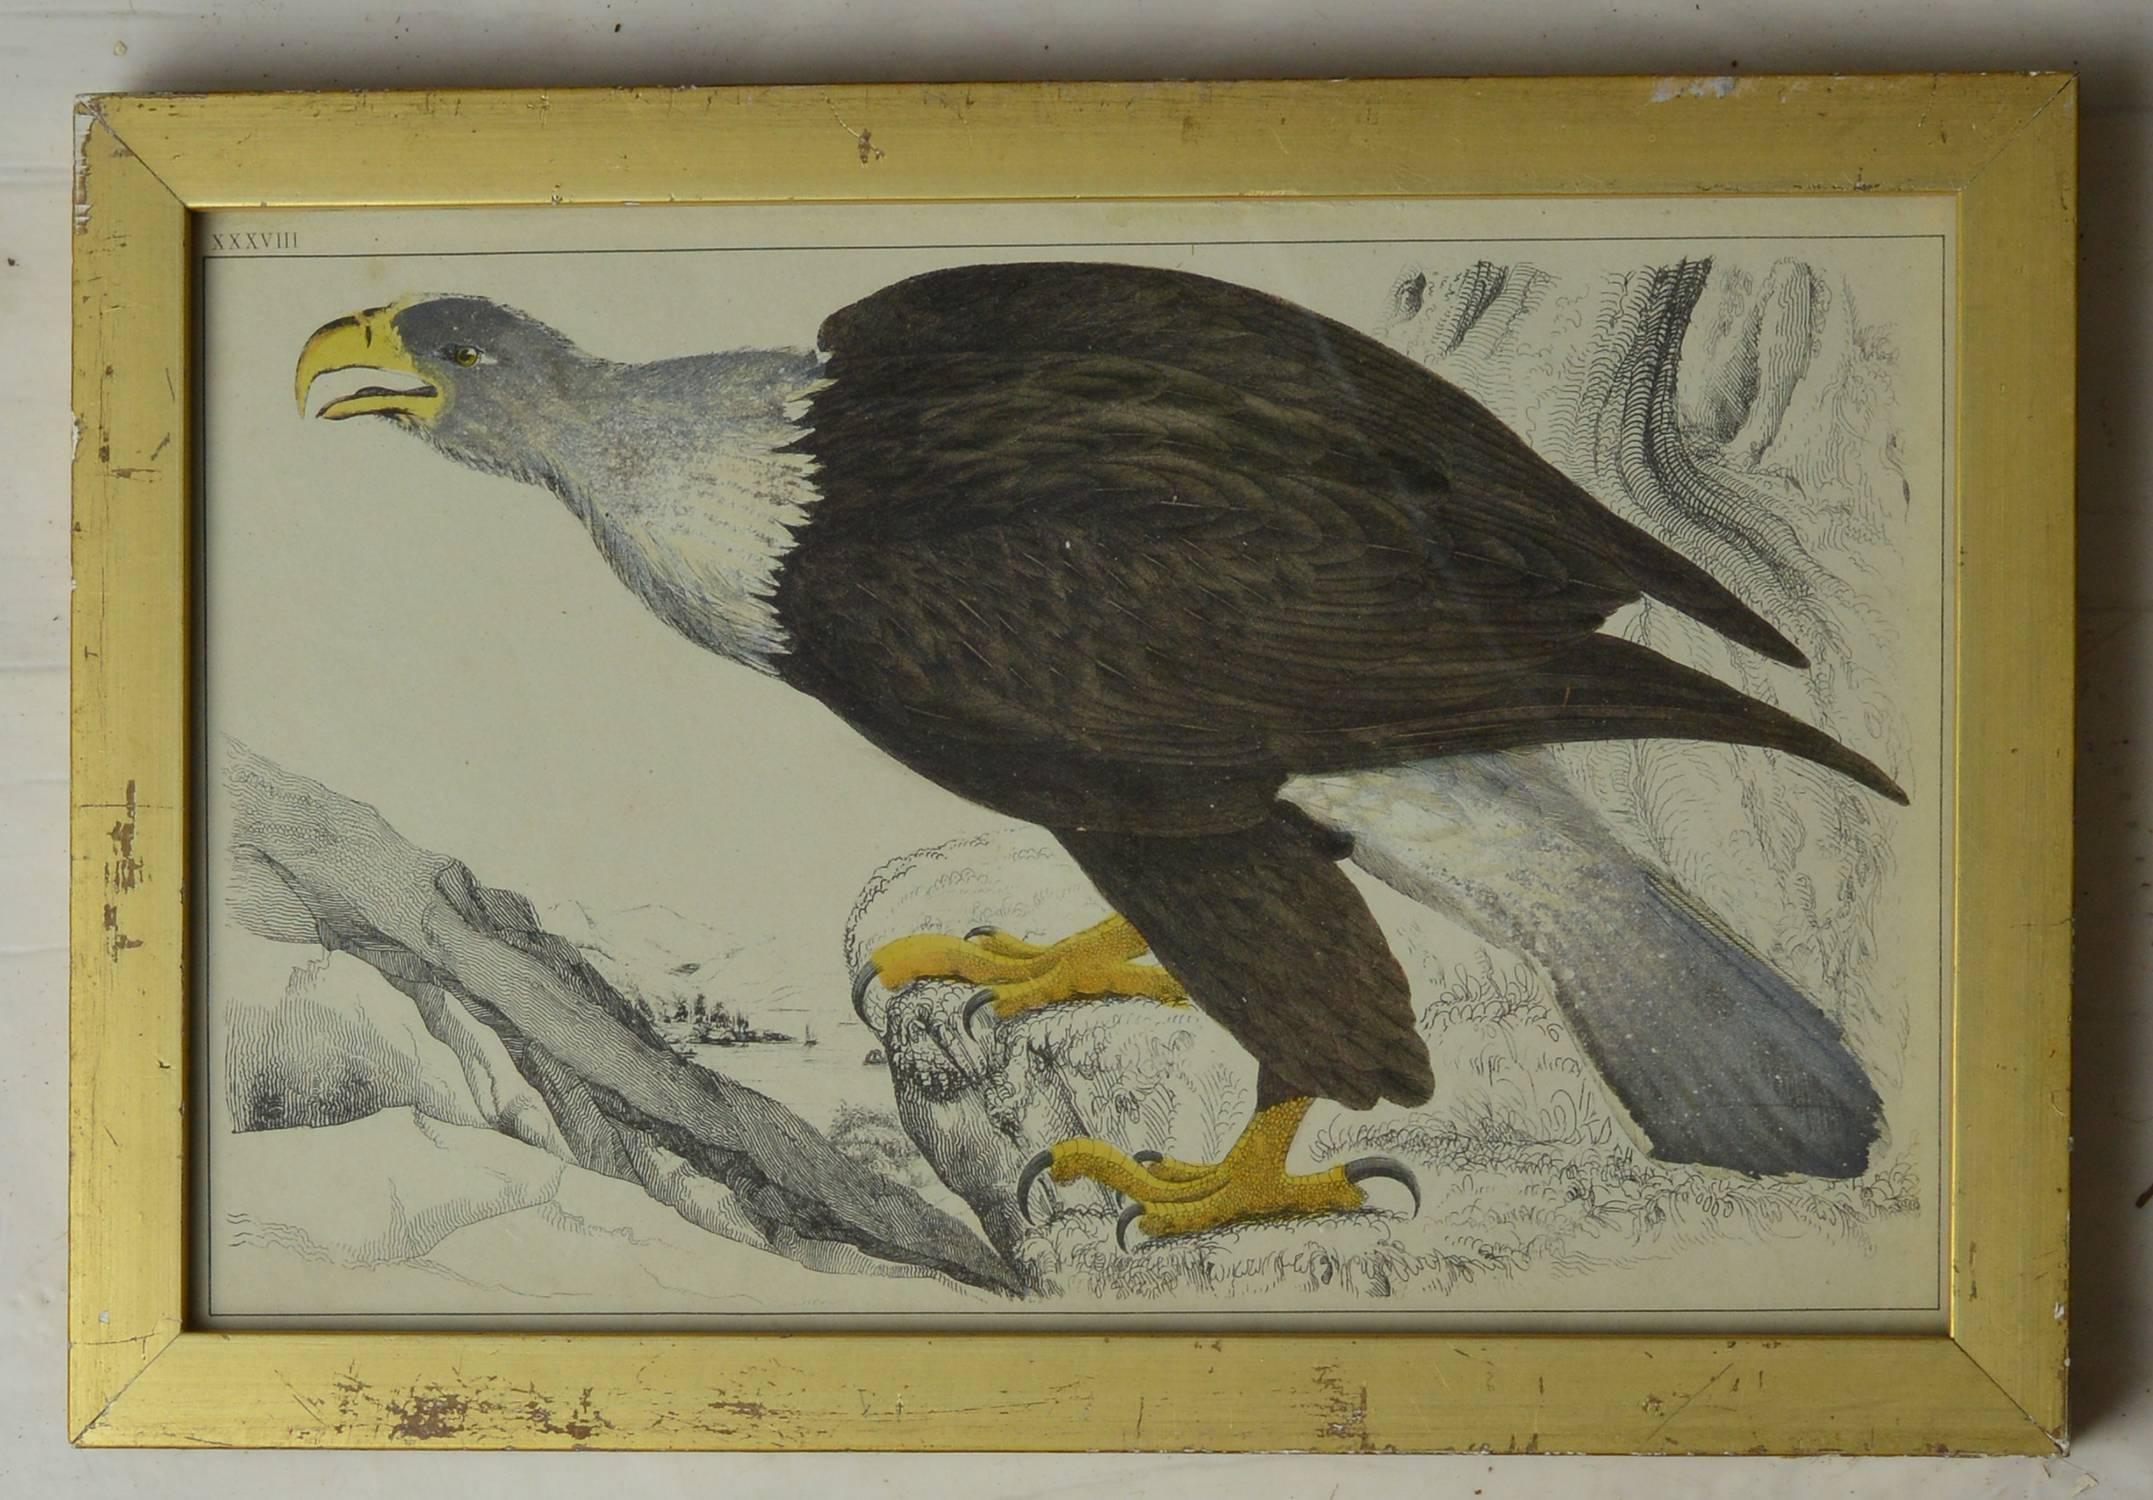 
Great image of an eagle.

Hand-colored lithograph

Original color.

From Goldsmith's Animated Nature

Published by Fullarton, London and Edinburgh, 1847

Presented in a distressed antique gilt frame.

The measurement given below is the frame size.